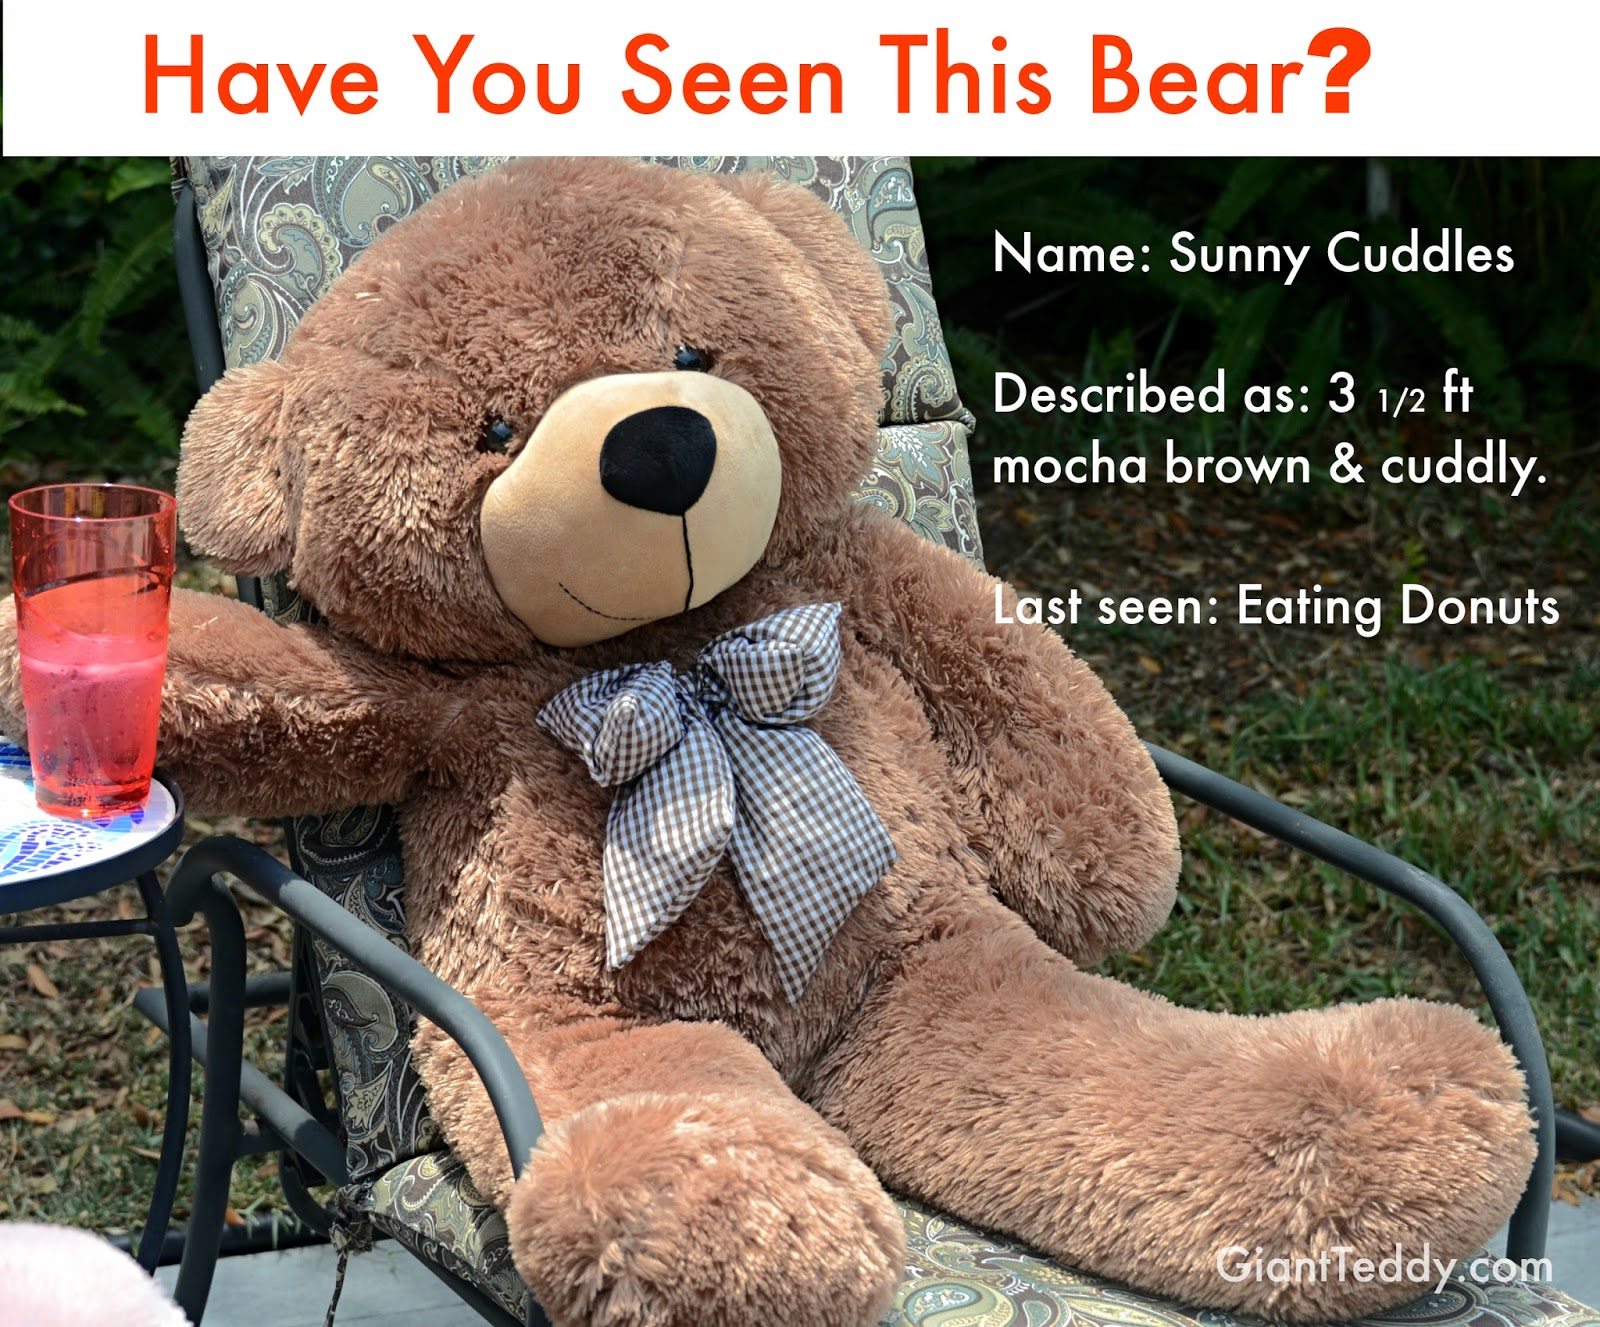 We issued a Missing Bear Fluffy Alert asking for help finding him